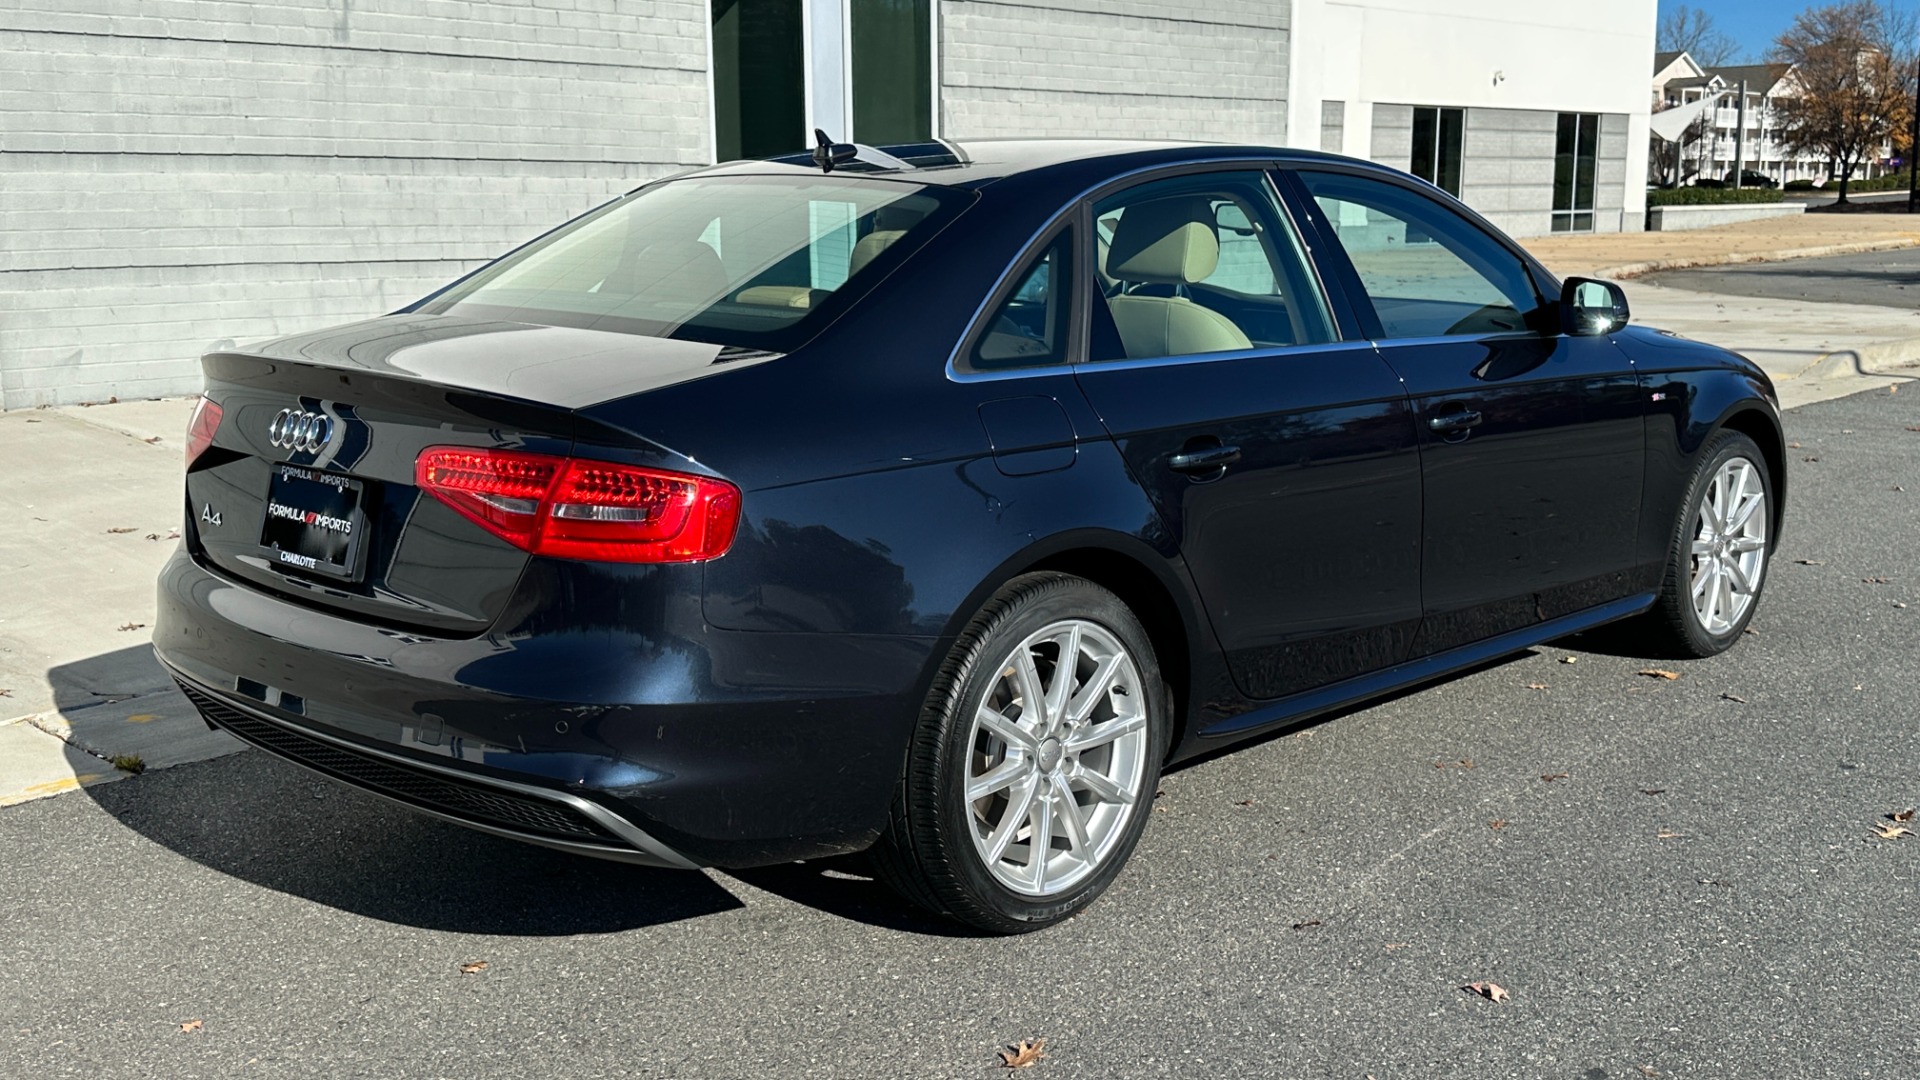 Used 2014 Audi A4 PREMIUM PLUS / NAVIGATION PLUS / BLINDSPOT ASSIST / LEATHER / SUNROOF for sale $21,900 at Formula Imports in Charlotte NC 28227 5